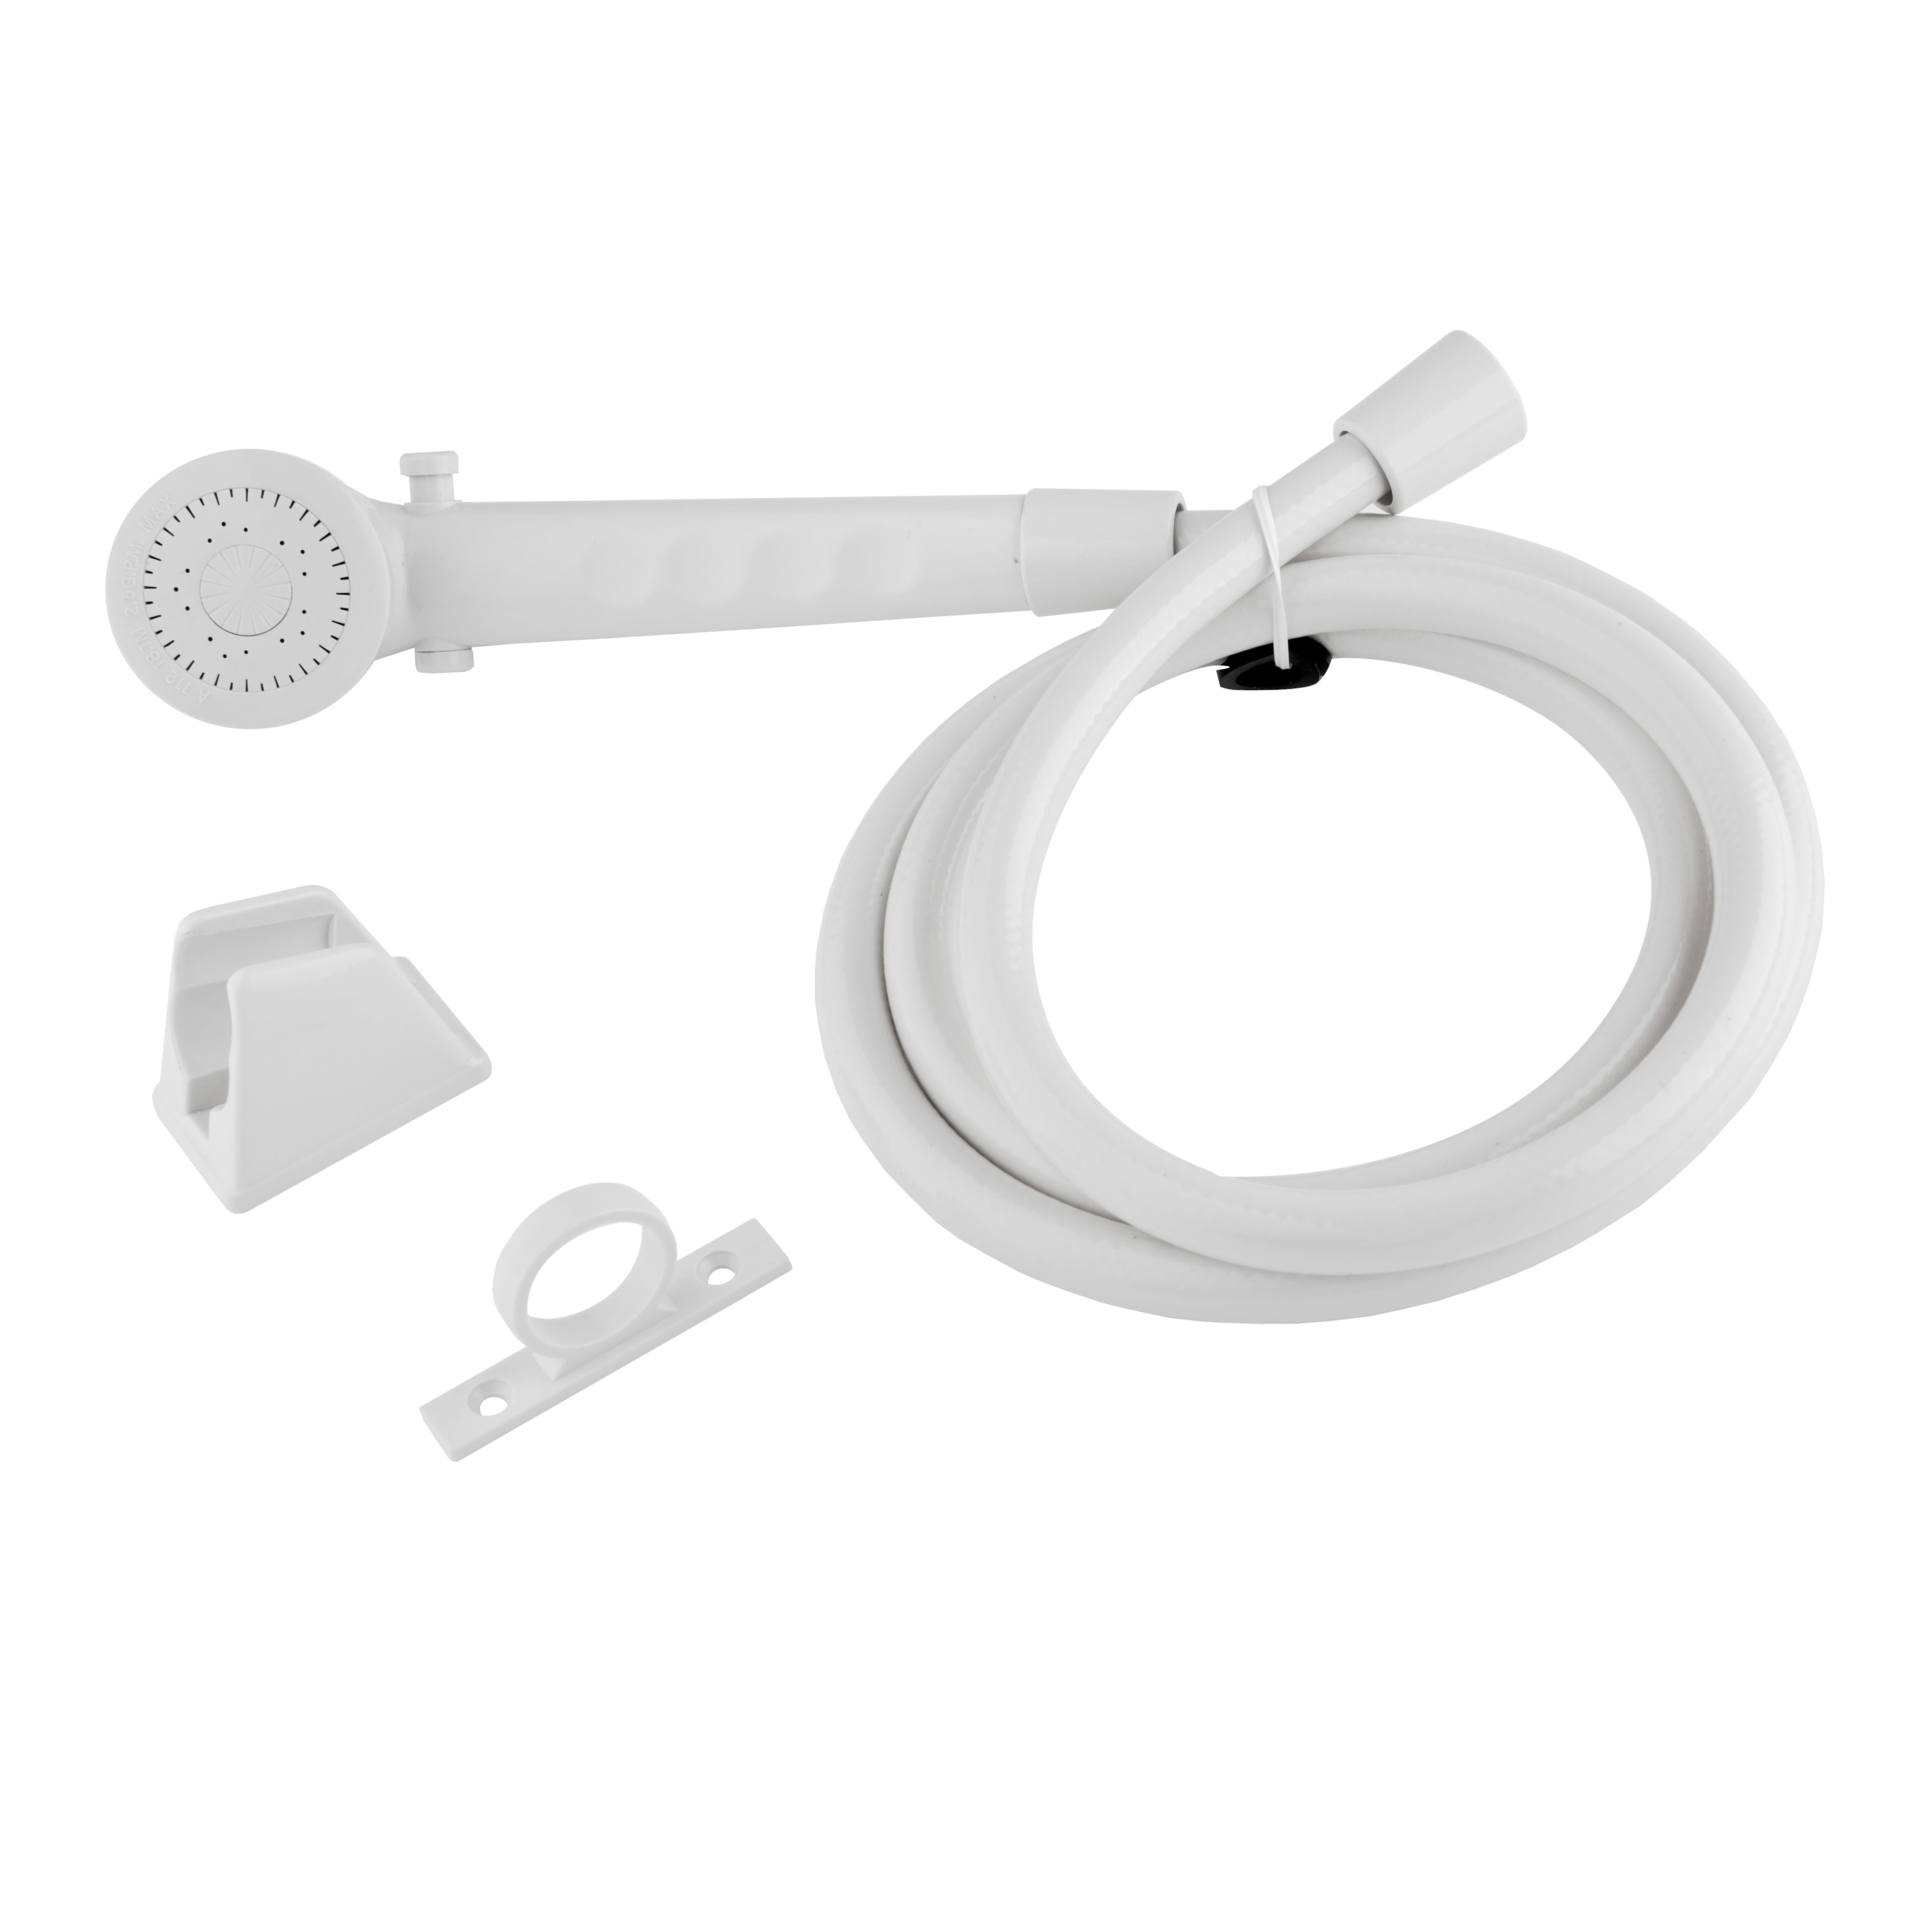 Silver and Hand Held Shower Head and Hose Kit DF-SA150-SN Dura Faucet RV Shower Faucet Valve Diverter Bundle DF-SA400K-CP 